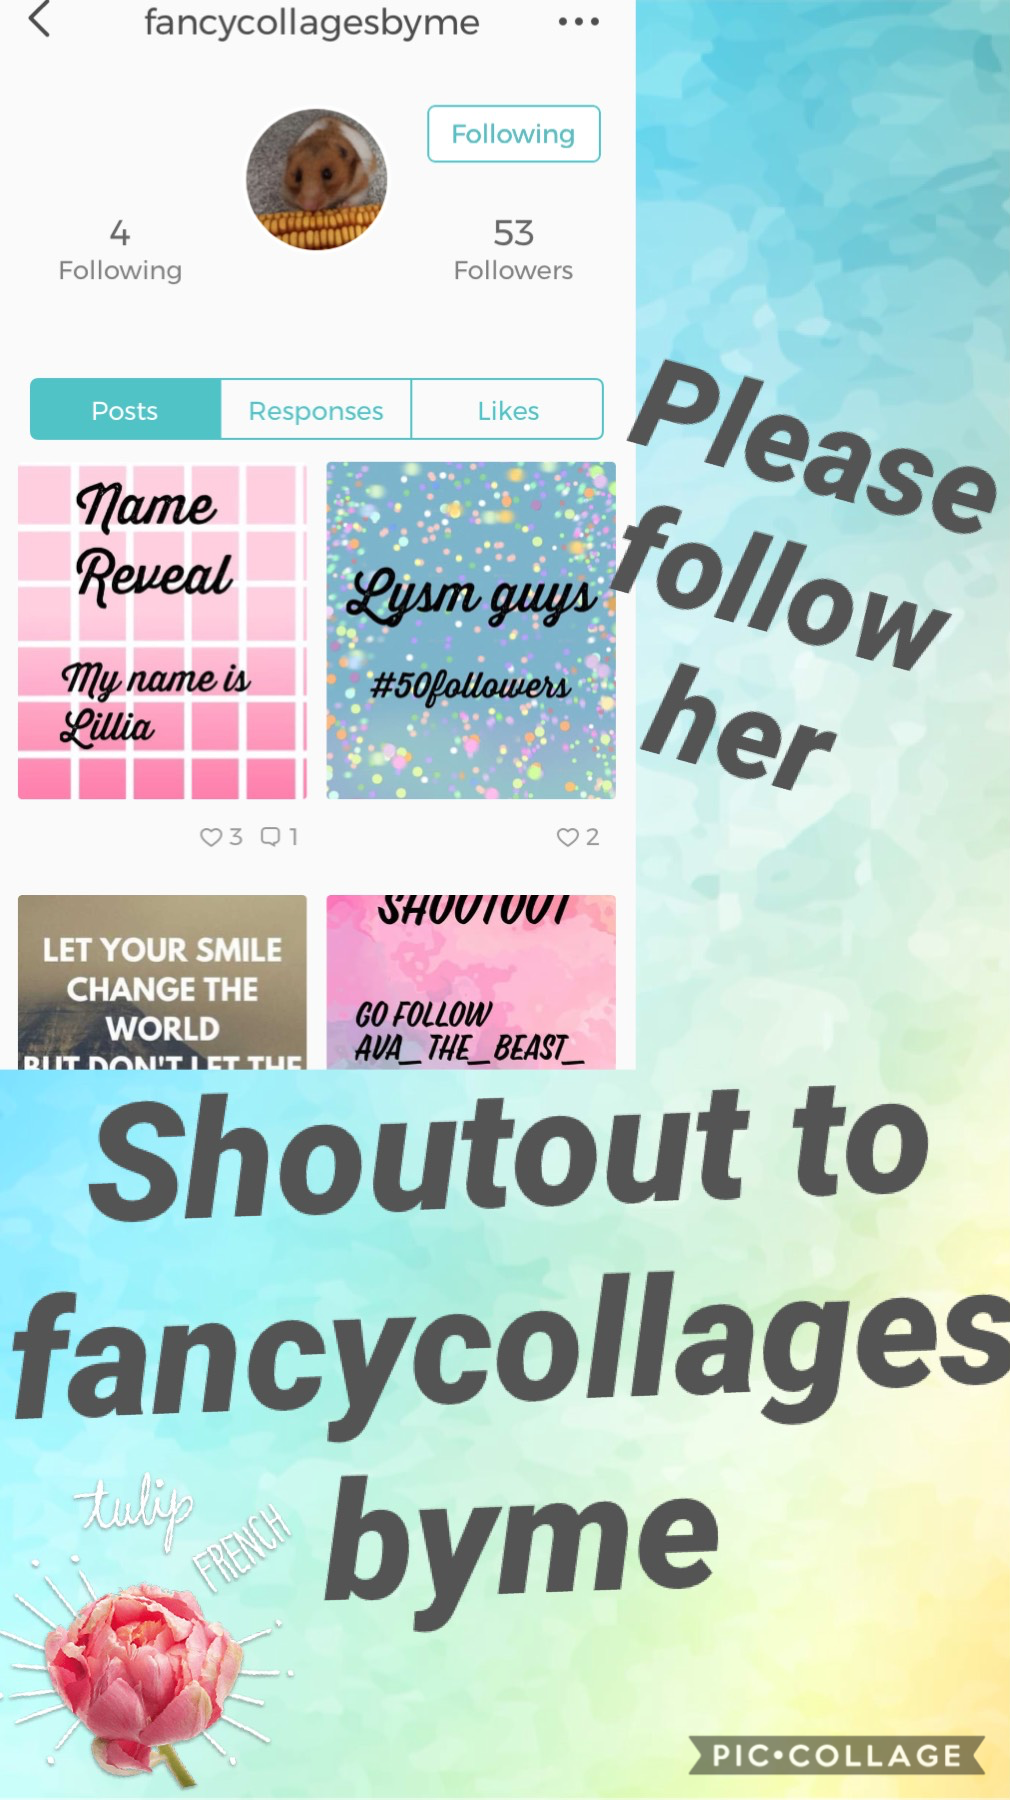 Shoutout goes to fancycollagesbyme